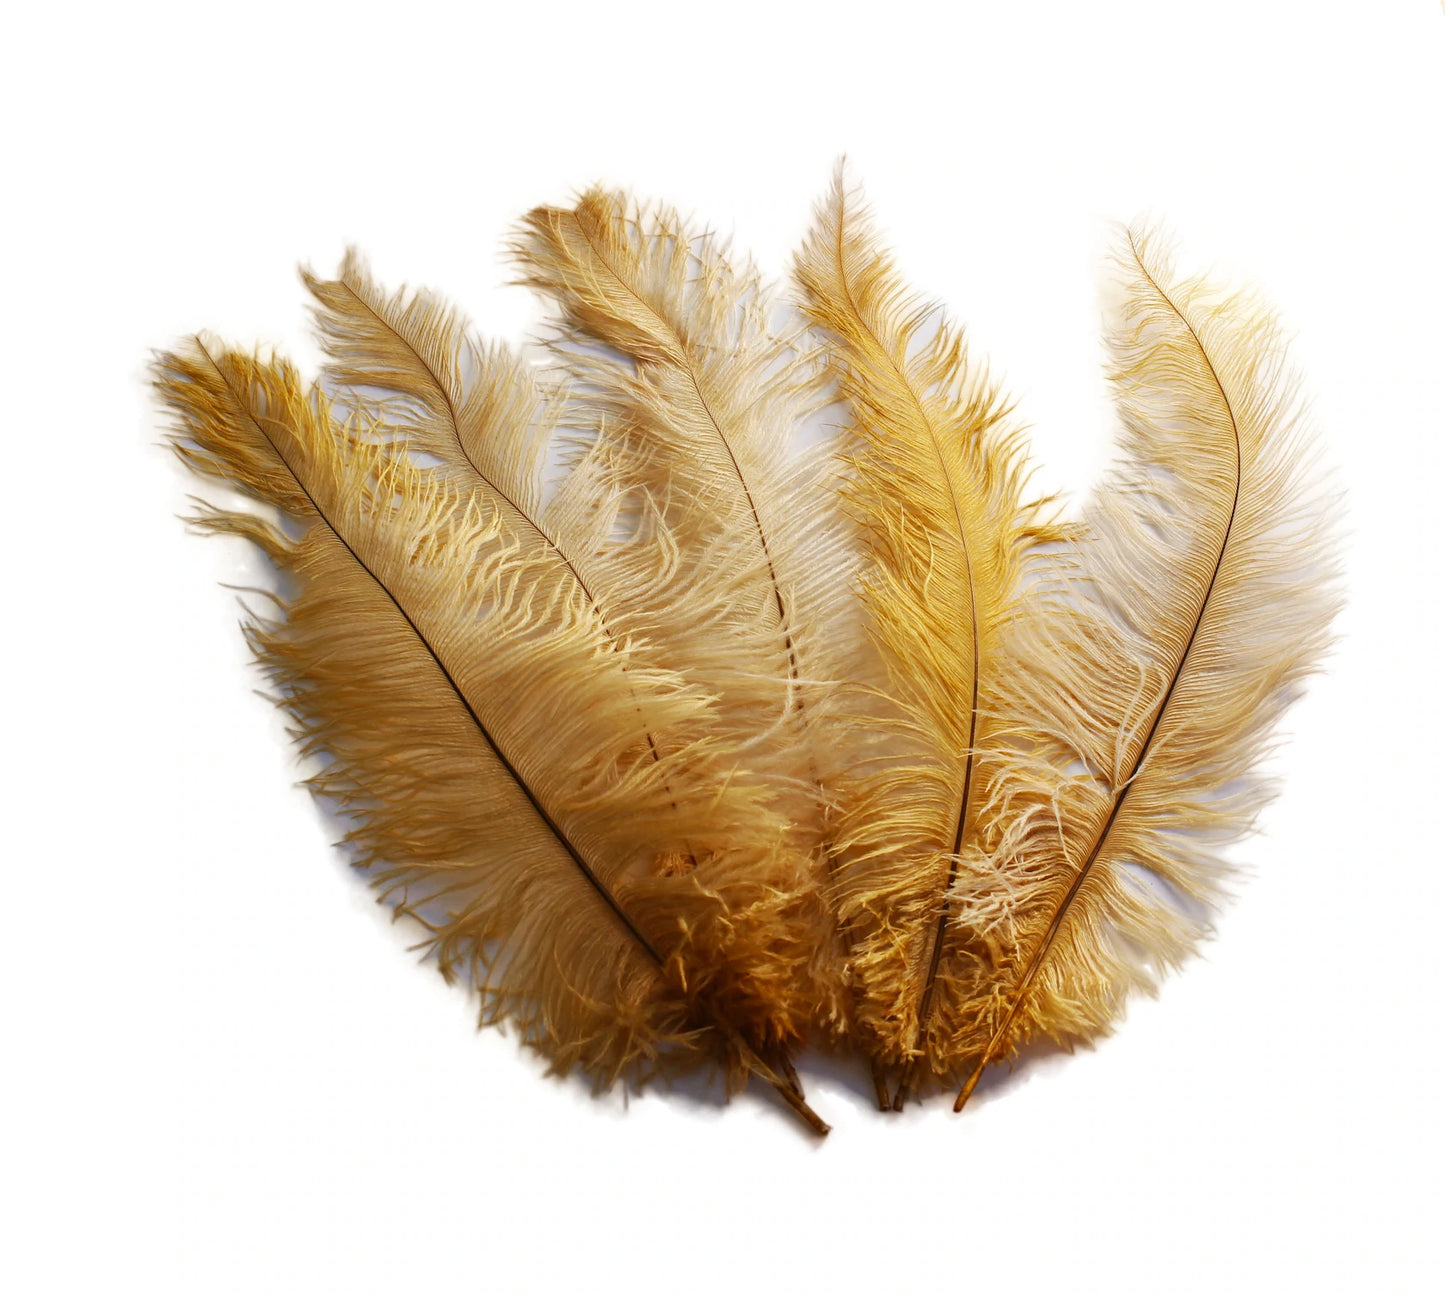 Ostrich Feather Spad Plumes 12-15" (Gold) - Buy Ostrich Feathers